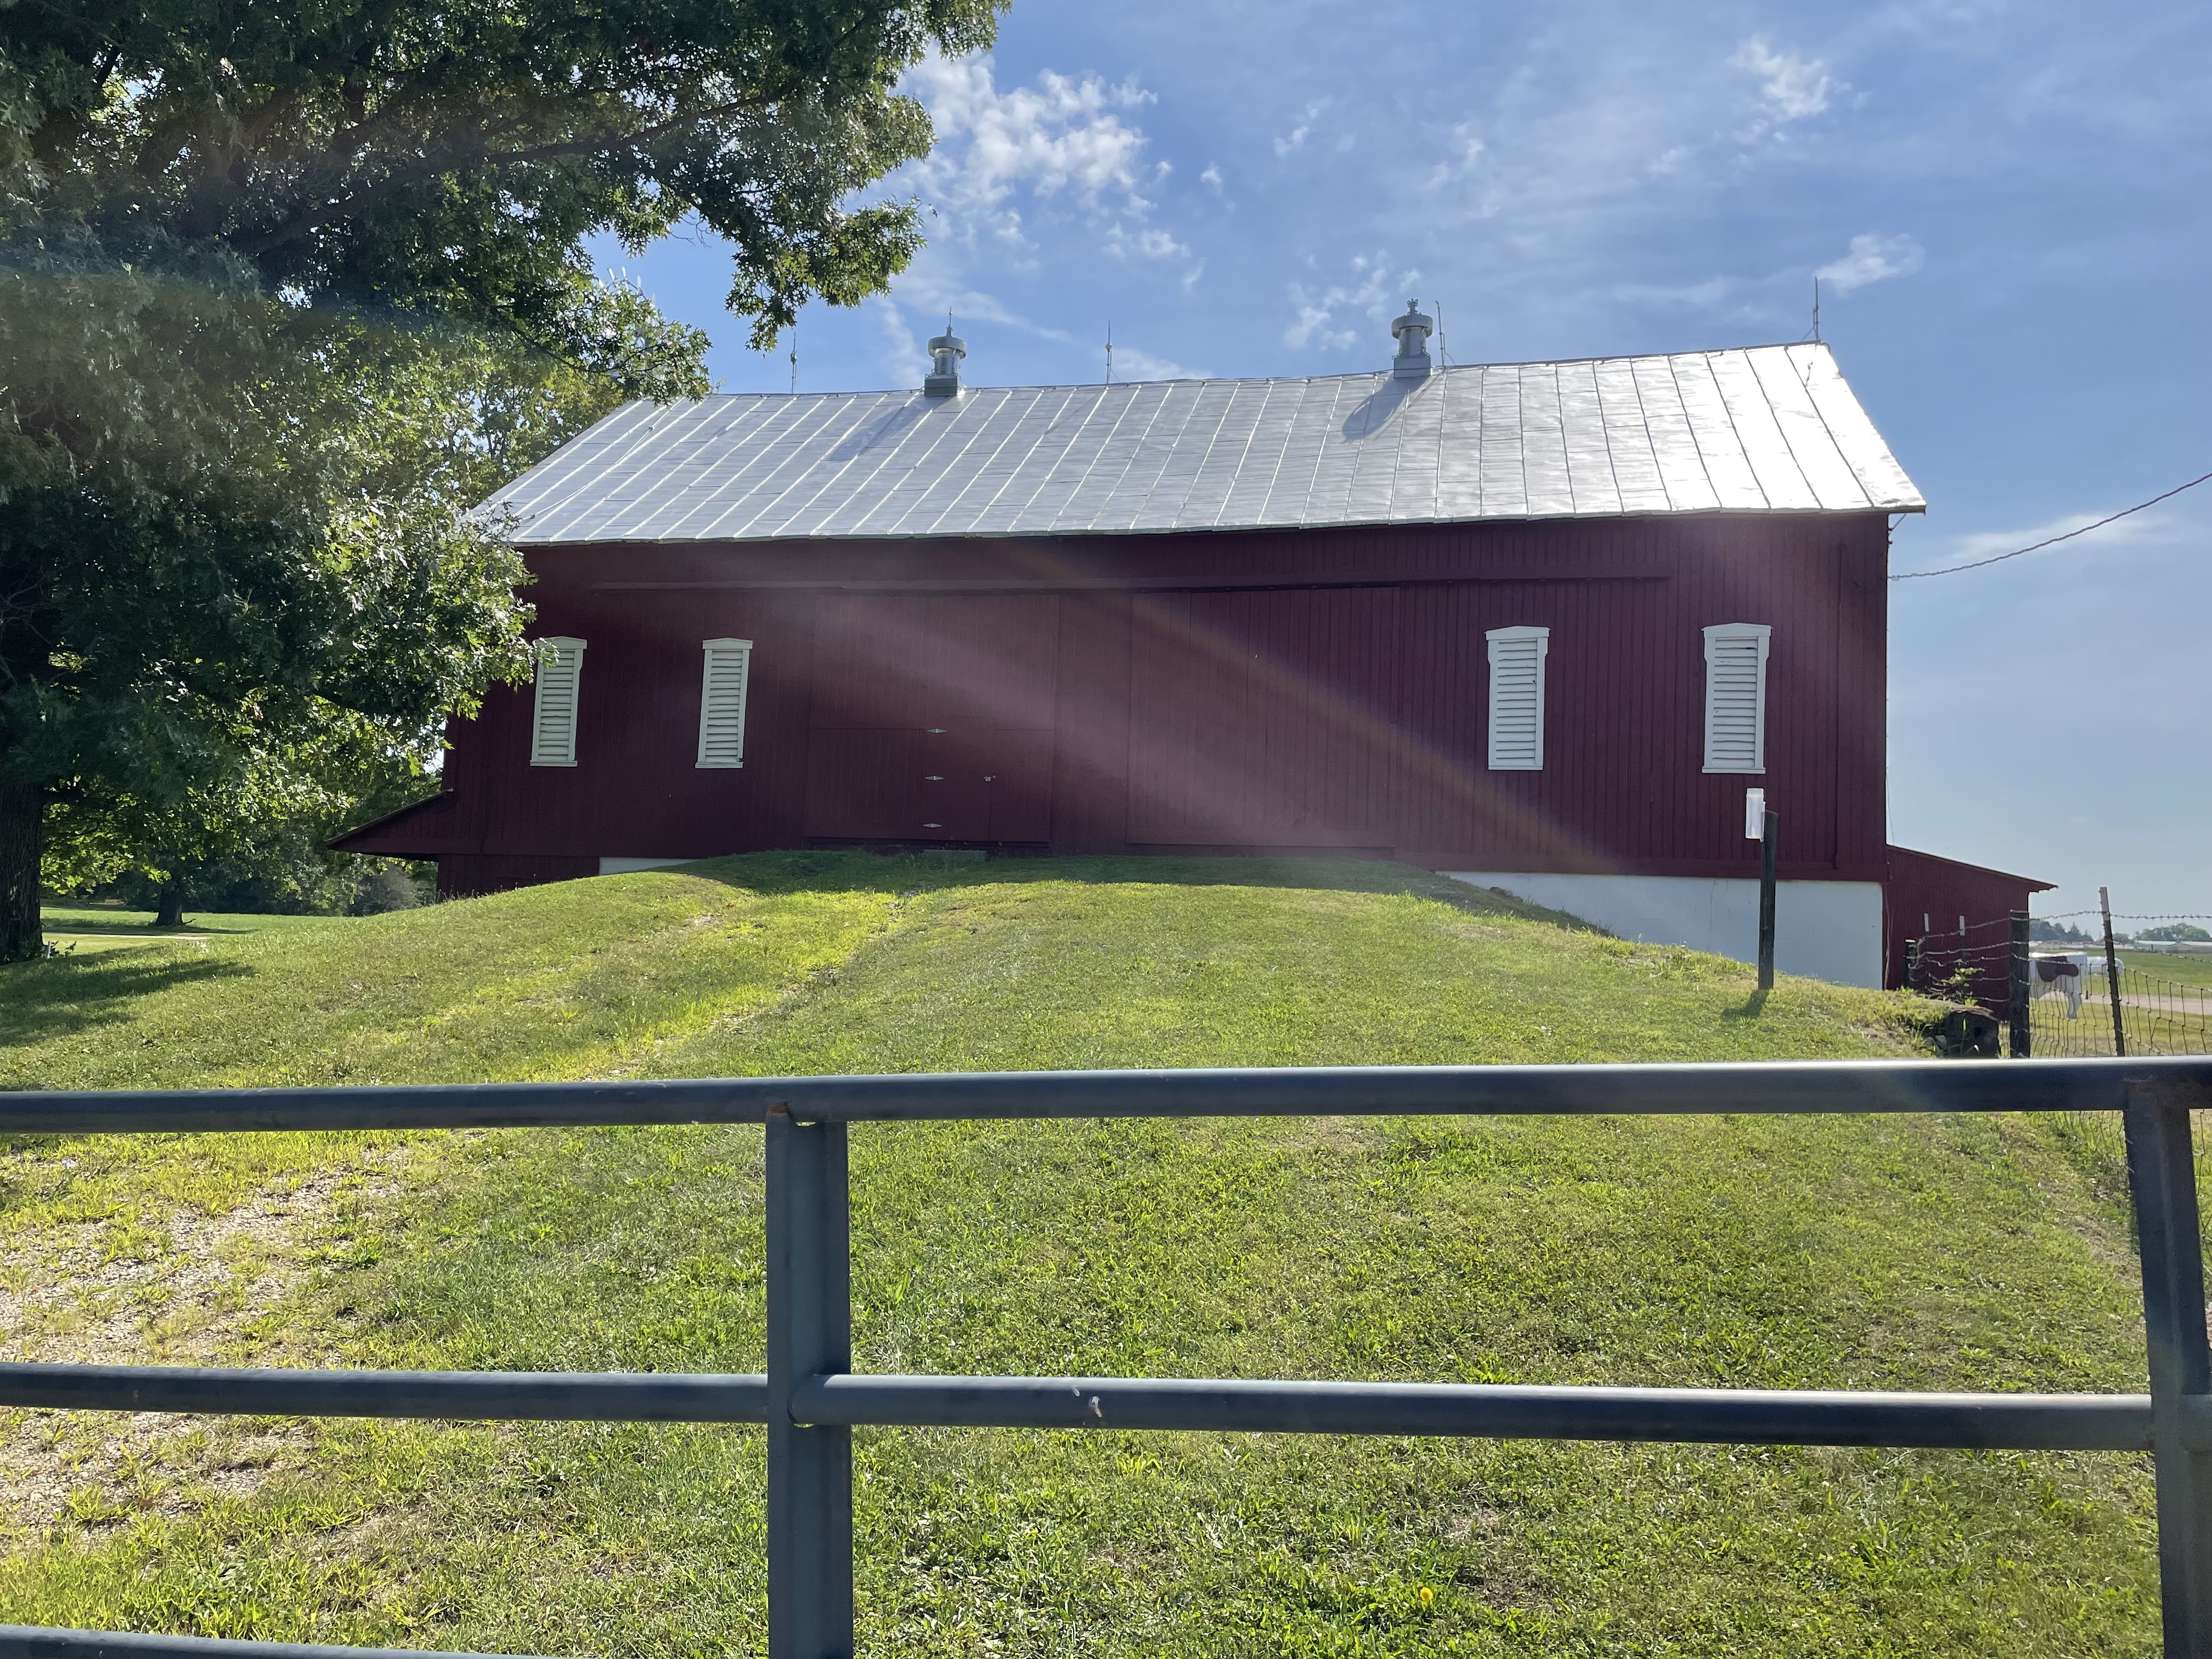 Evans Family Ranch, located at 11140 Milton-Carlisle Road in New Carlisle, is continuing to evolve as a destination for entertainment and education.